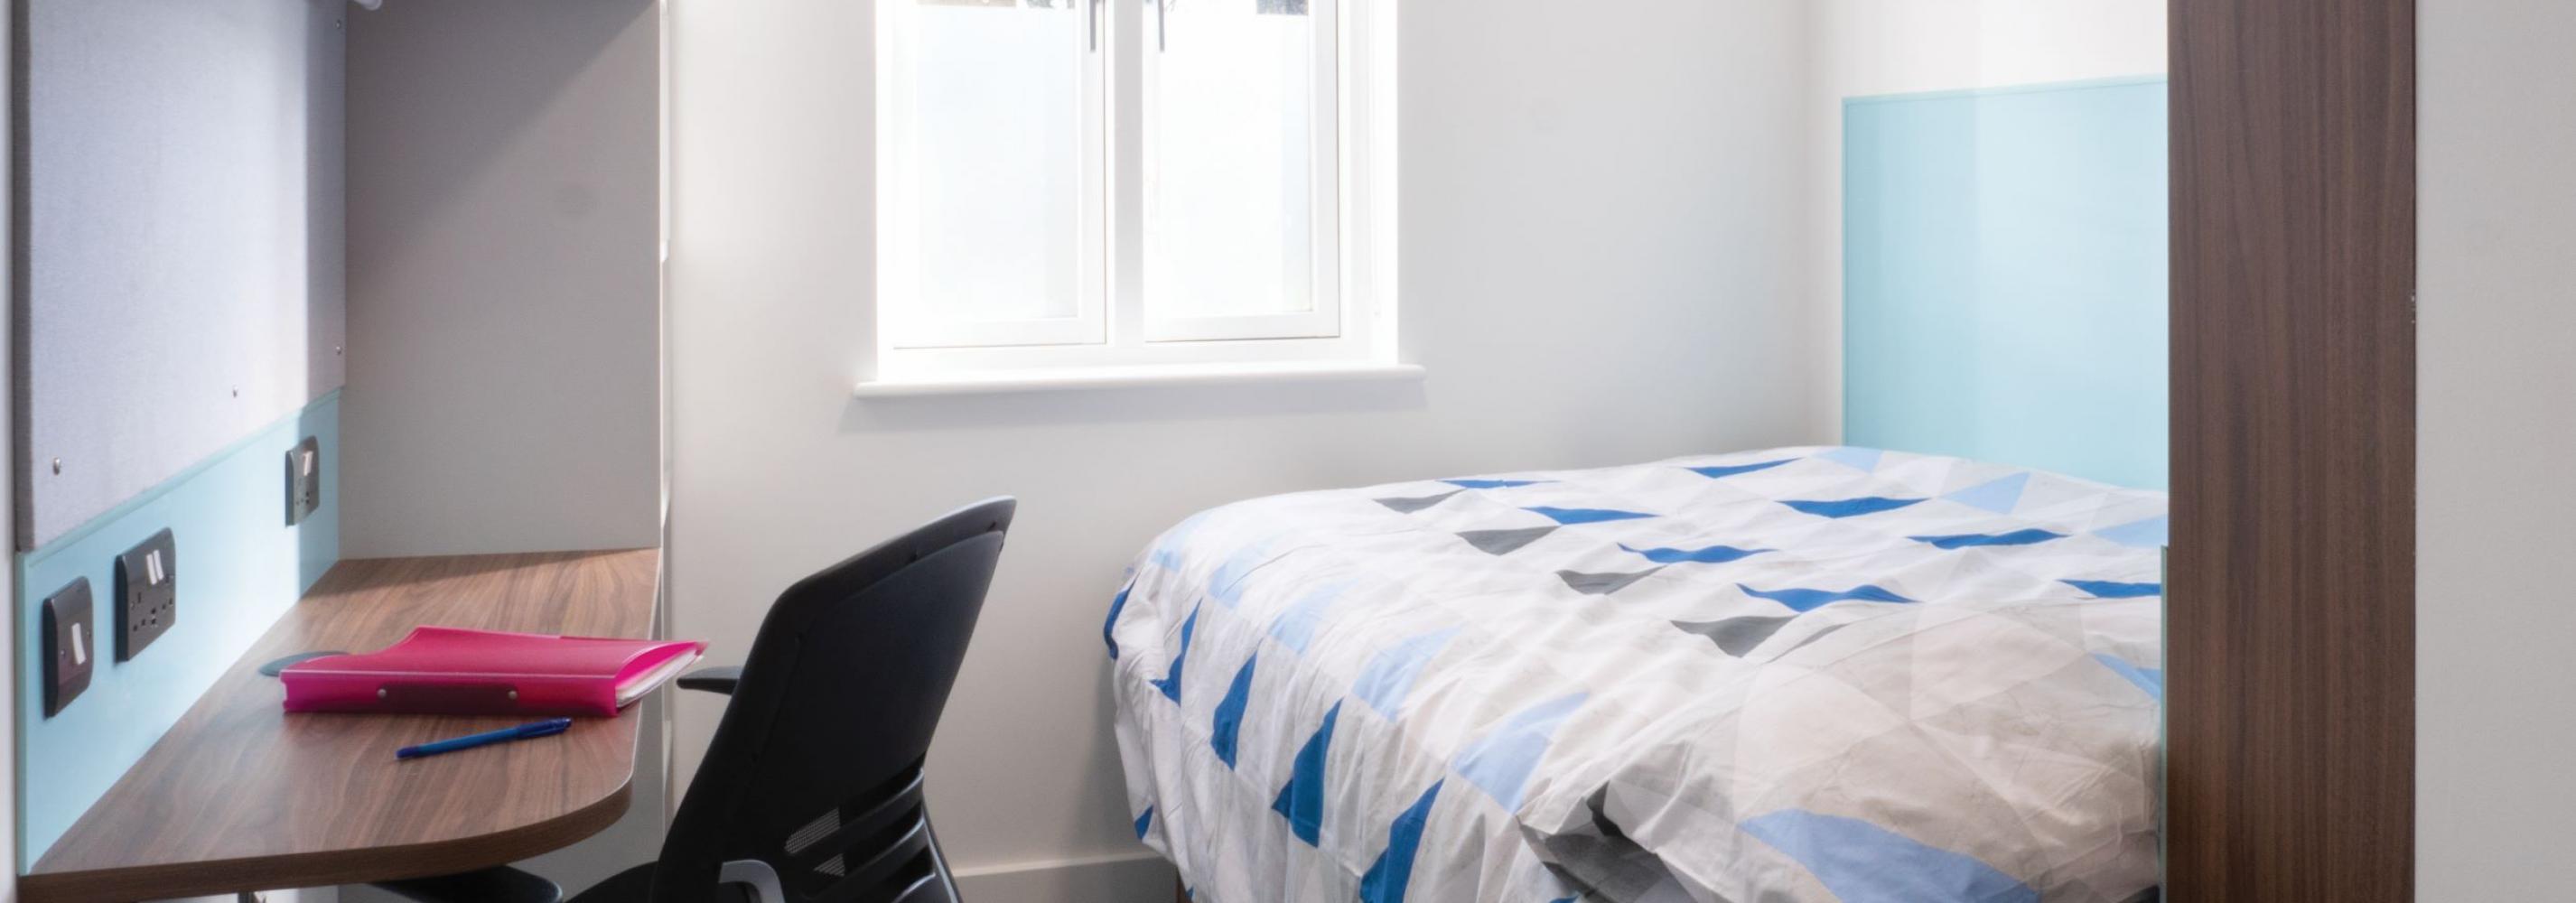 White bedroom with wood and blue accents. Small double bed facing the window. Blue blinds above the window. A desk, desk chair and wall shelving to the left.